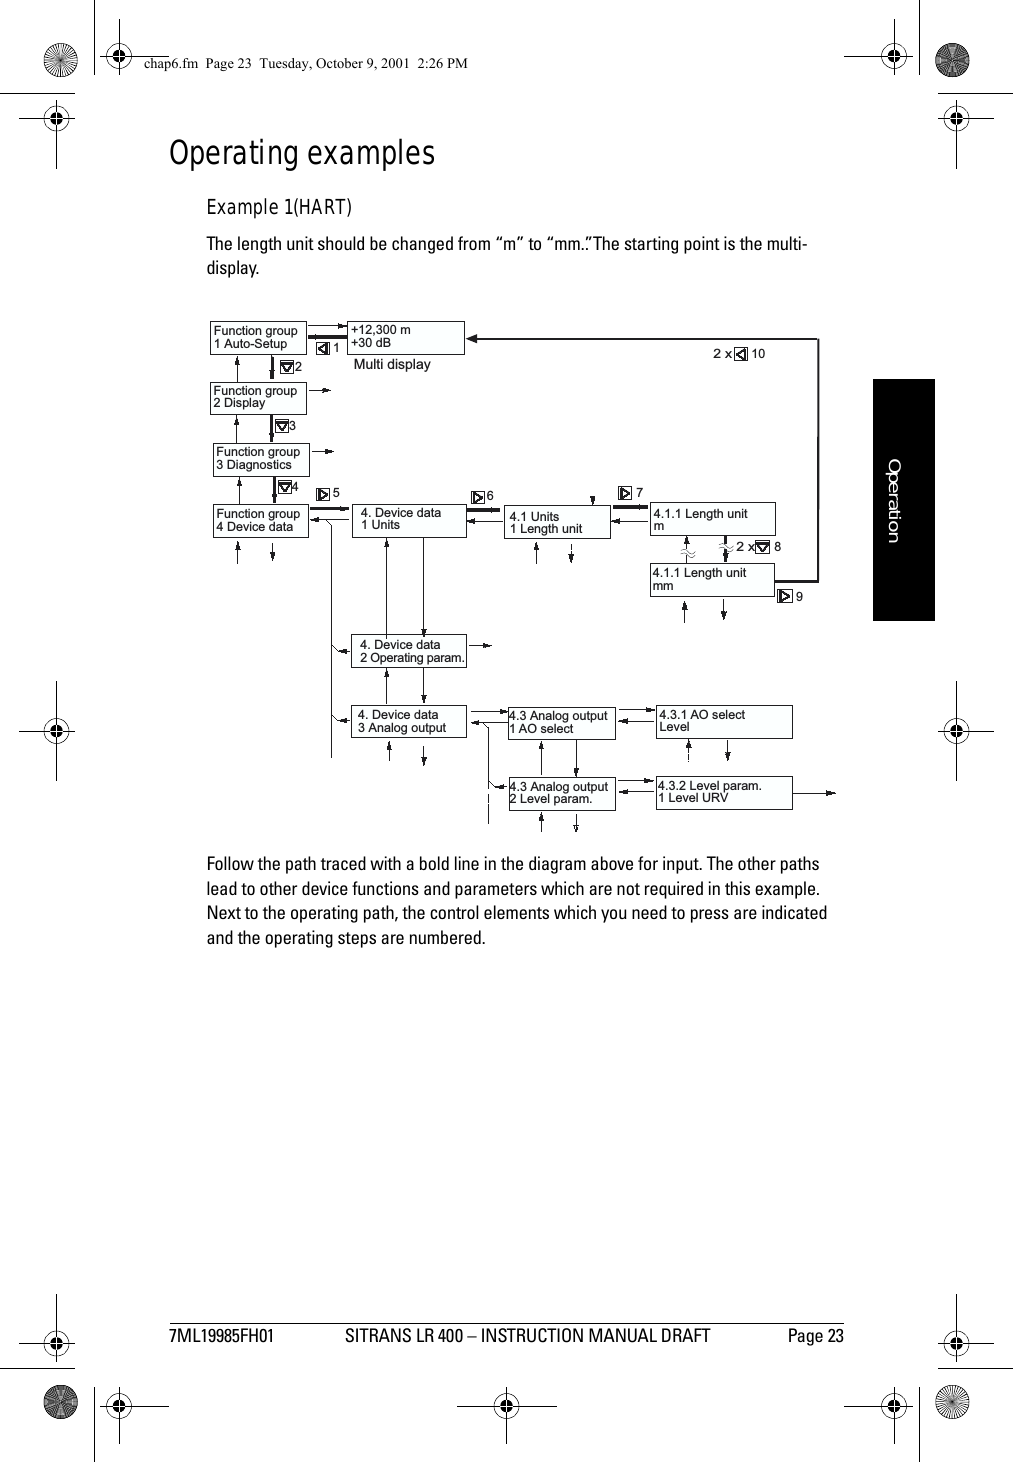 7ML19985FH01 SITRANS LR 400 – INSTRUCTION MANUAL DRAFT Page 23mmmmmOperationOperating examplesExample 1(HART)The length unit should be changed from “m” to “mm.”. The starting point is the multi-display.Follow the path traced with a bold line in the diagram above for input. The other paths lead to other device functions and parameters which are not required in this example. Next to the operating path, the control elements which you need to press are indicated and the operating steps are numbered.2 x56Function group4 Device data4Function group3 Diagnostics123Function group1 Auto-SetupFunction group2 Display+12,300 m+30 dB4. Device data1 Units 4.1 Units1 Length unit6784. Device data2 Operating param.4. Device data3 Analog output 4.3 Analog output1 AO select4.3.1 AO selectLevel4.3 Analog output2 Level param.4.3.2 Level param.1 Level URV4.1.1 Length unitm4.1.1 Length unitmmMulti display92 x10chap6.fm  Page 23  Tuesday, October 9, 2001  2:26 PM